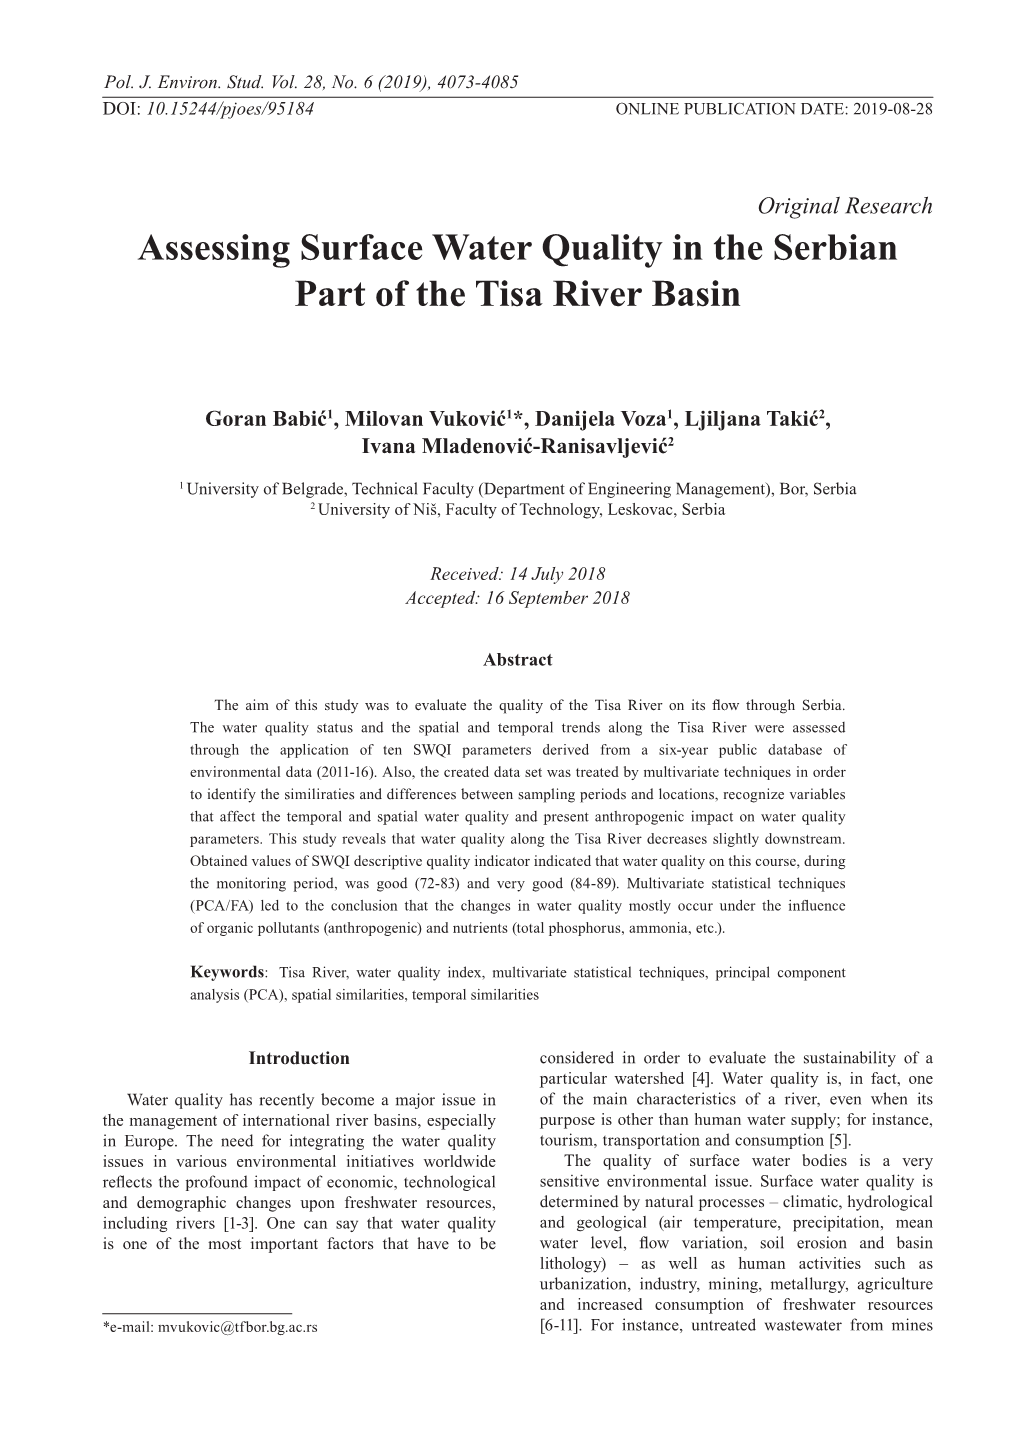 Assessing Surface Water Quality in the Serbian Part of the Tisa River Basin